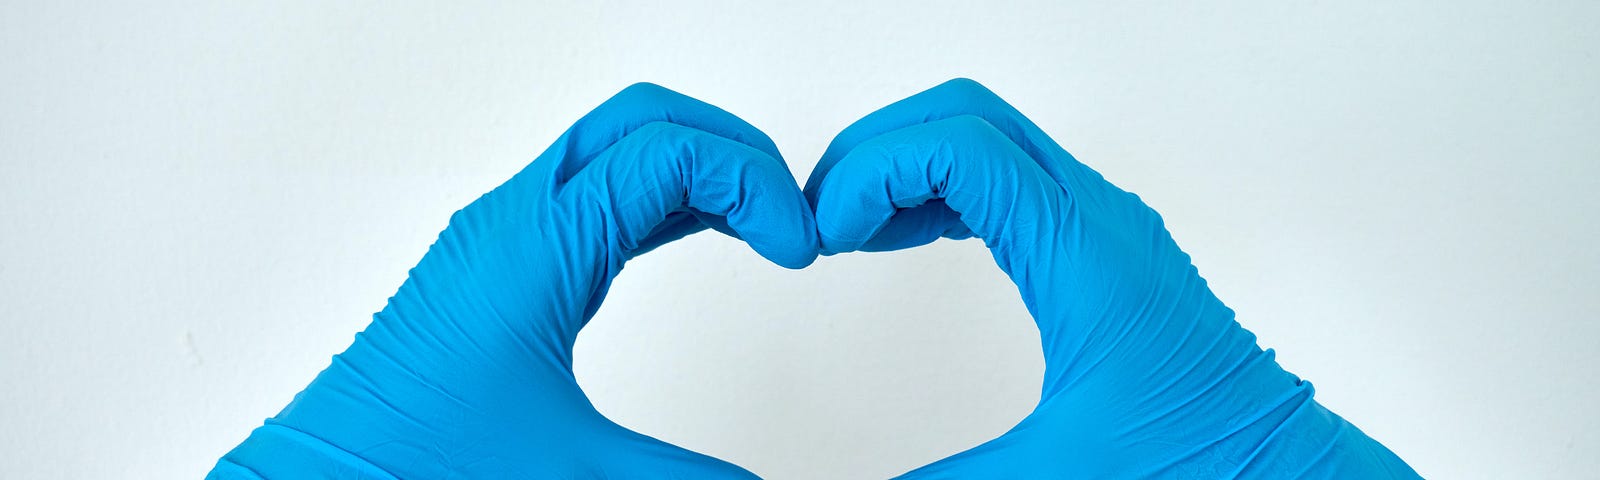 Two hands covered by blue, plastic gloves making the heart sign